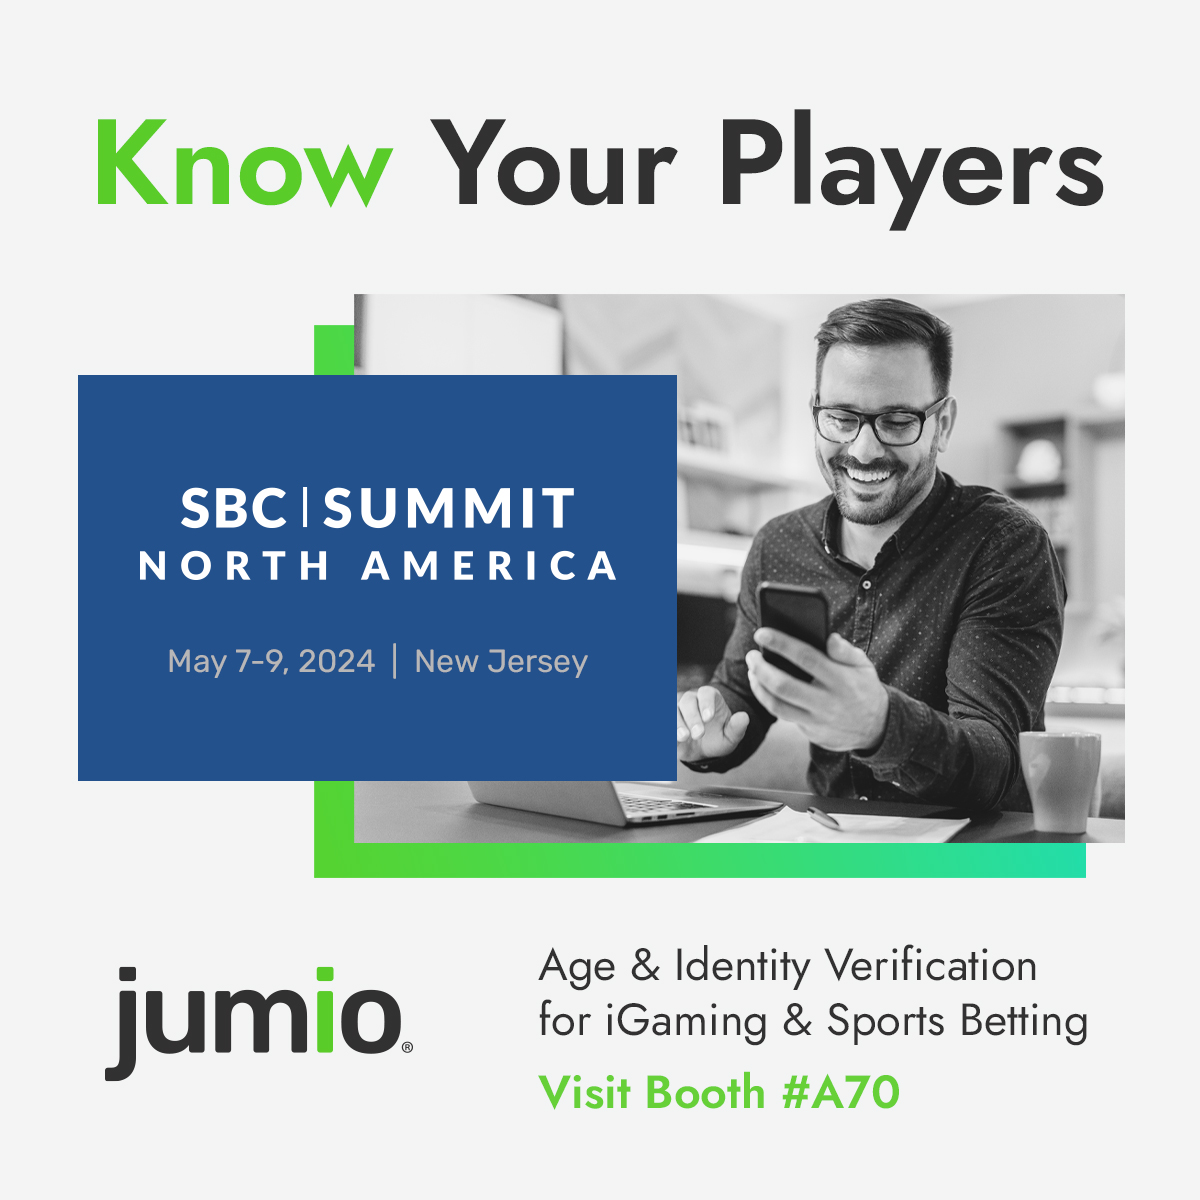 Attending SBC Summit North America next month? Visit booth A70 to learn how Jumio can help you know and trust your players online. sbcevents.com/sbc-summit-nor… #gaming #gambling #identityverification #ageverification #KYC #AML